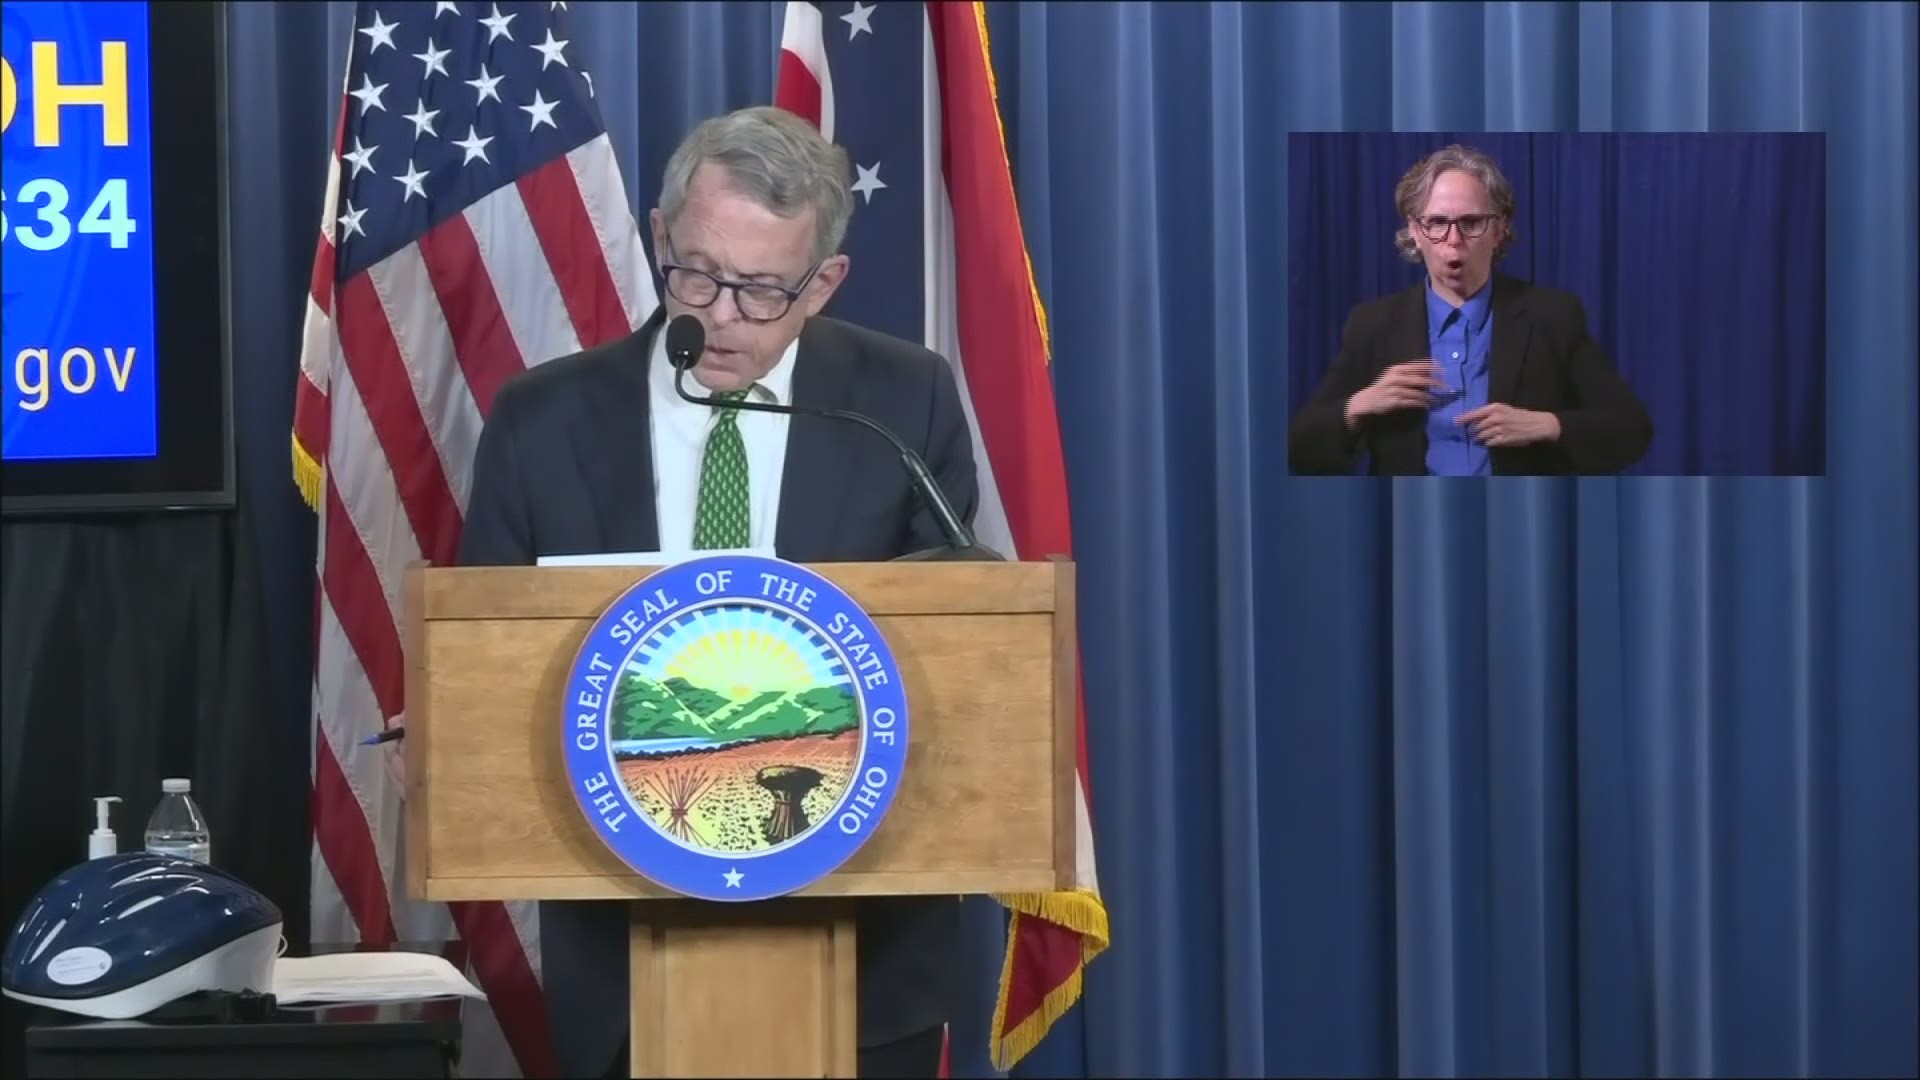 Ohio Governor Mike DeWine said today that he will make a decision on the re-openings of Cedar Point and zoos next week.